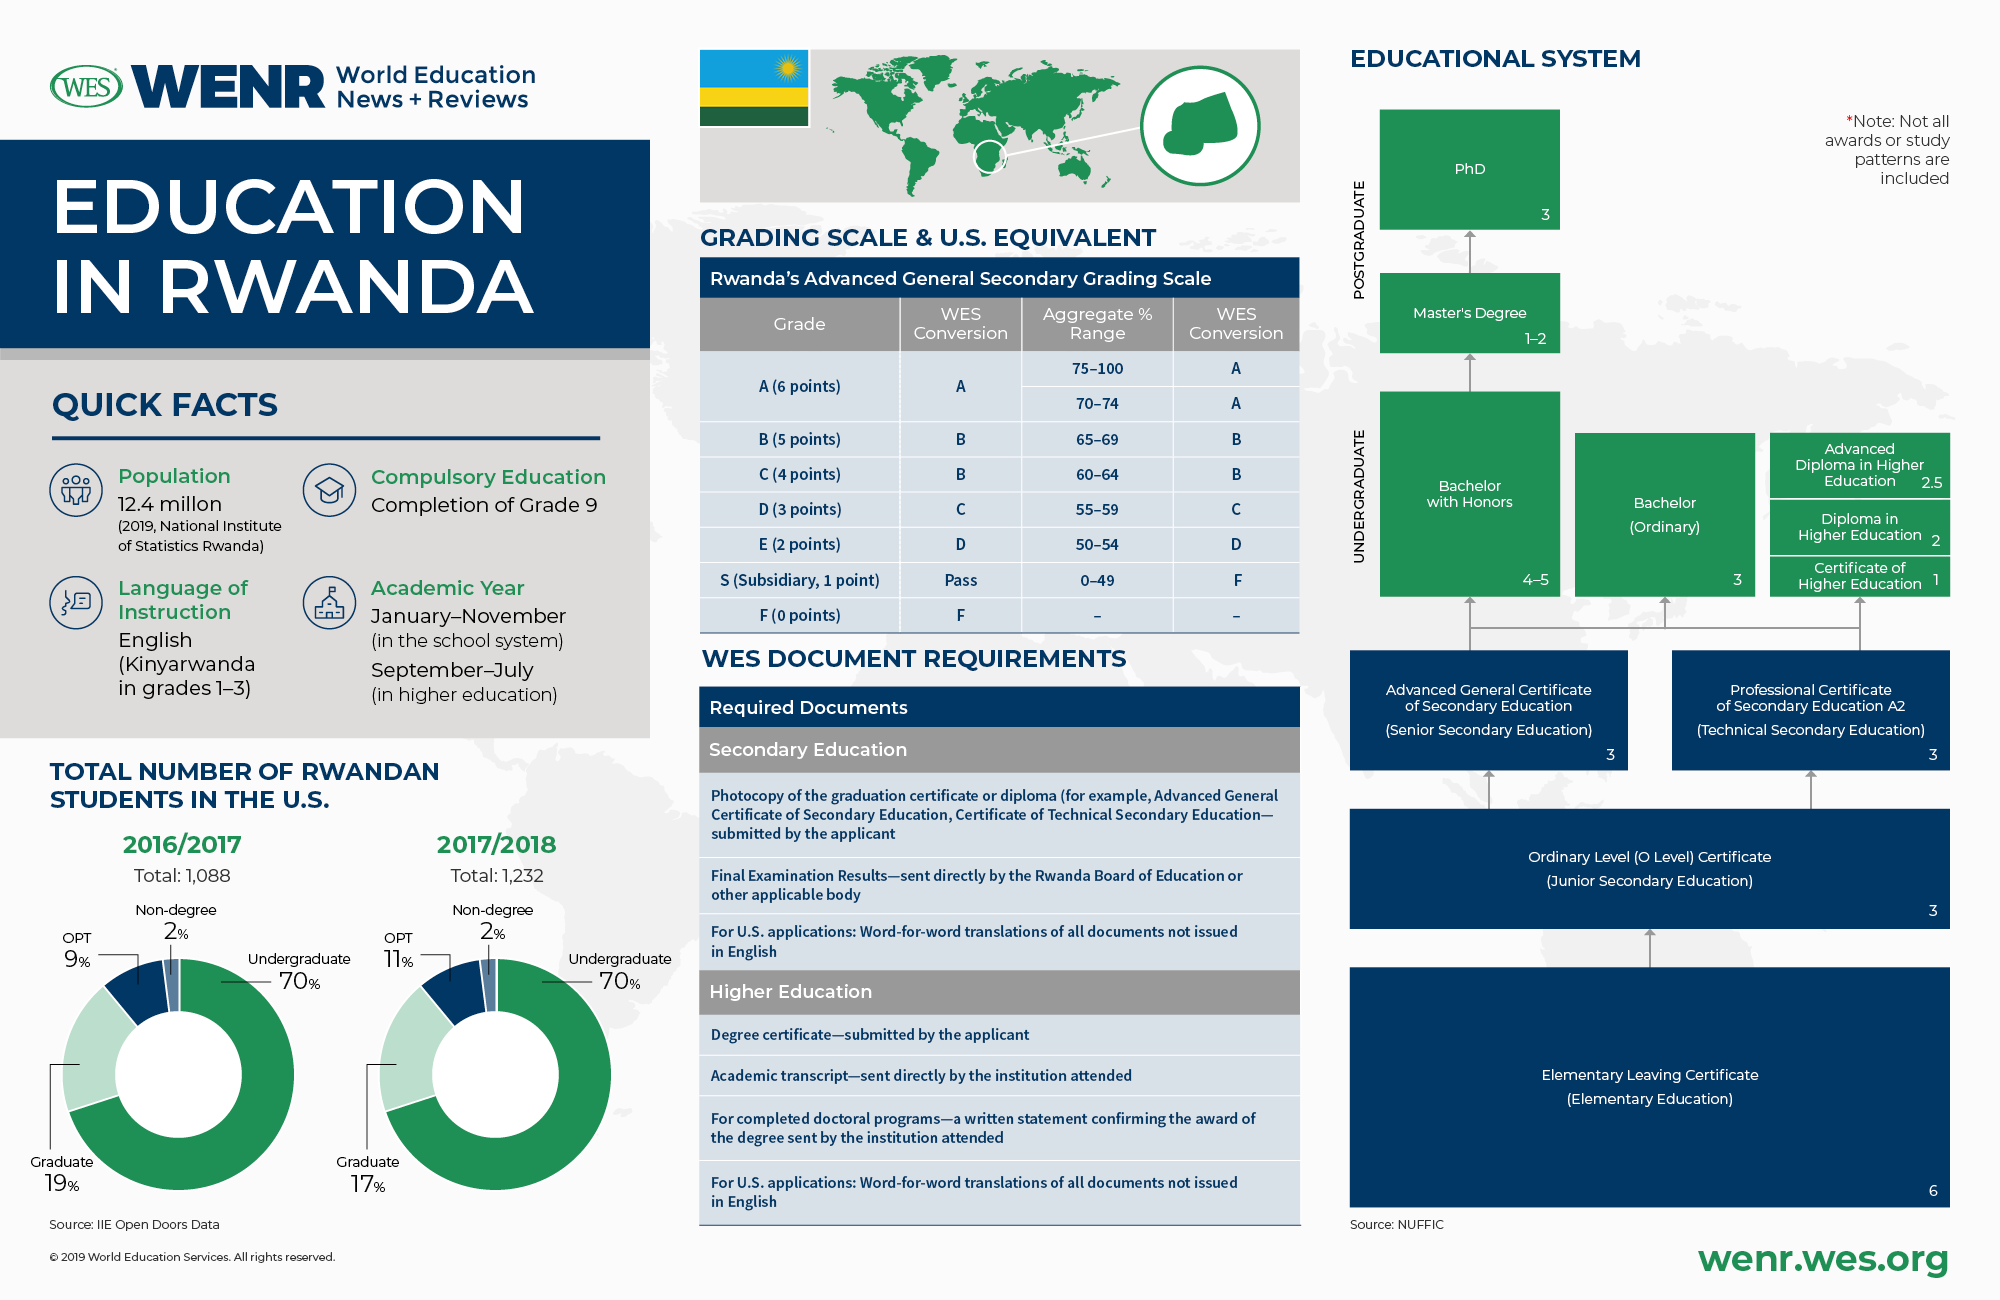 Education in Rwanda infographic: quick facts about education in Rwanda